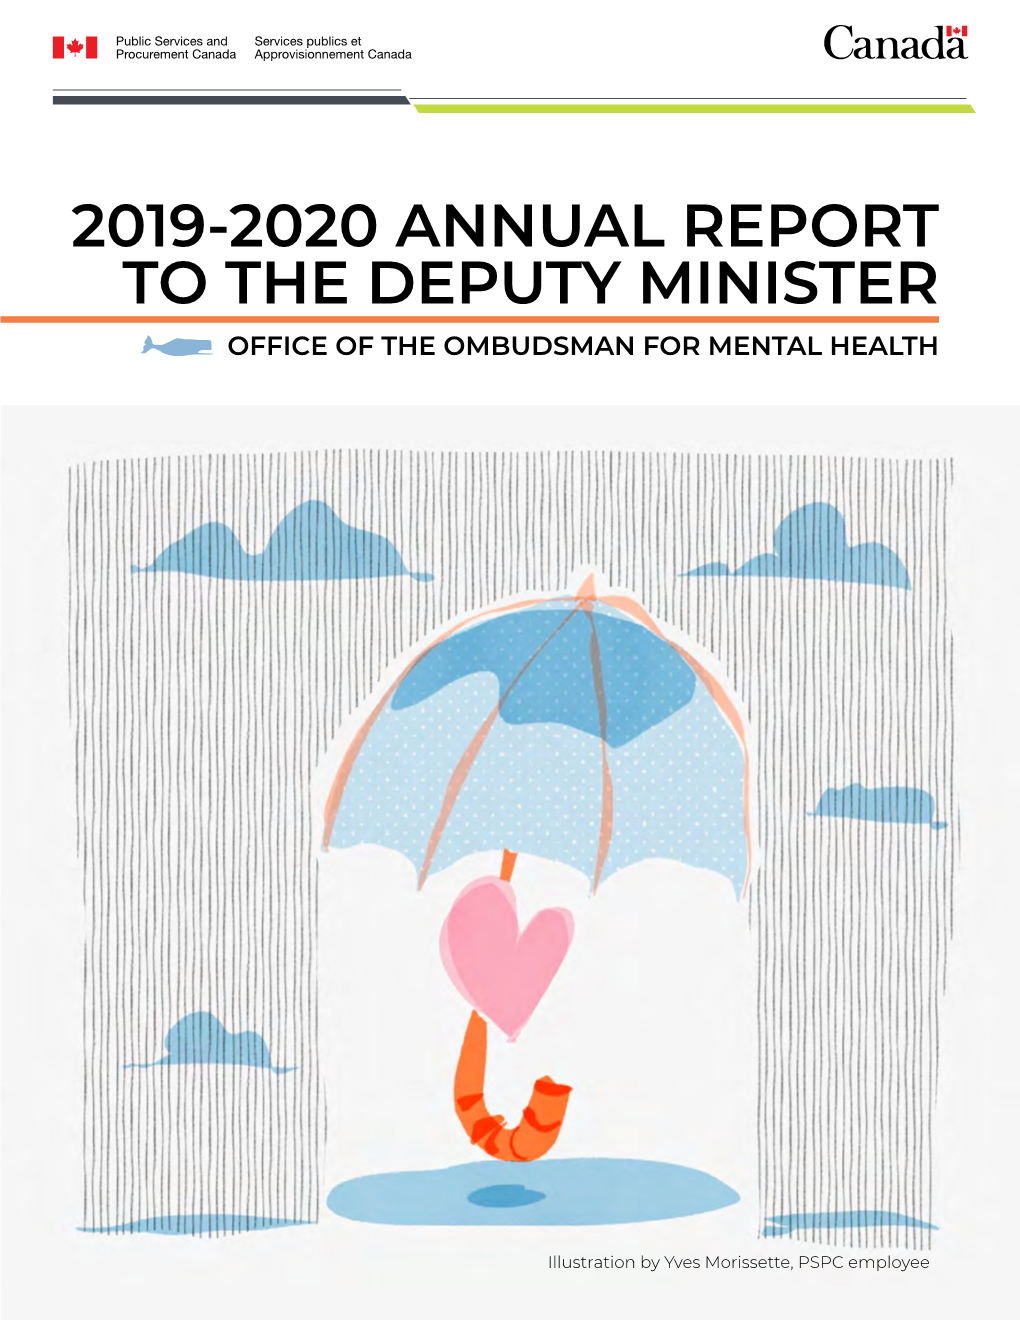 2019-2020 Annual Report to the Deputy Minister Office of the Ombudsman for Mental Health